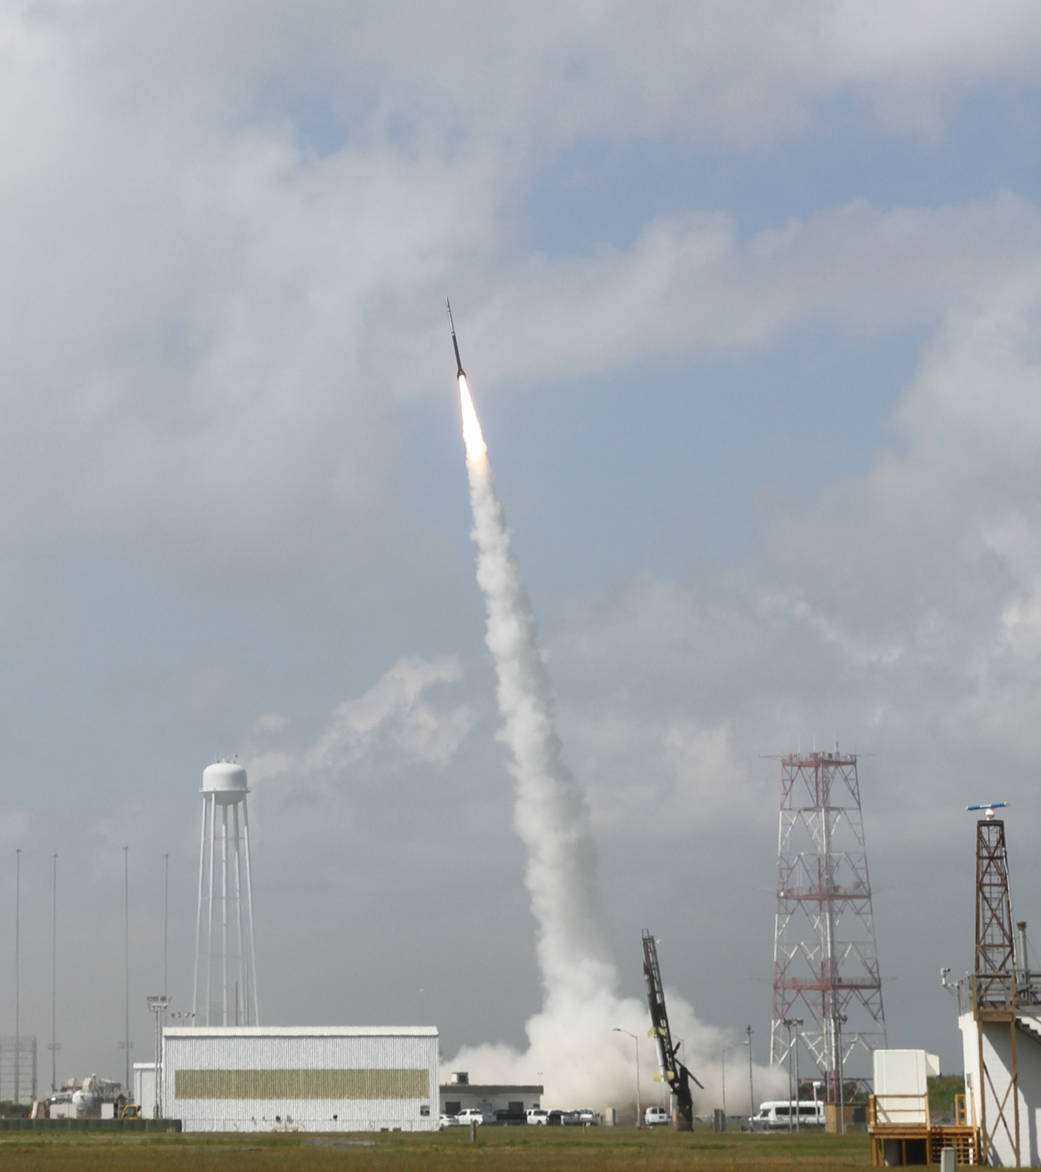 A NASA sounding rocket launched on July 4, 2013, in support of the Daytime Dynamo Mission. Image credit: NASA/J. Eggers